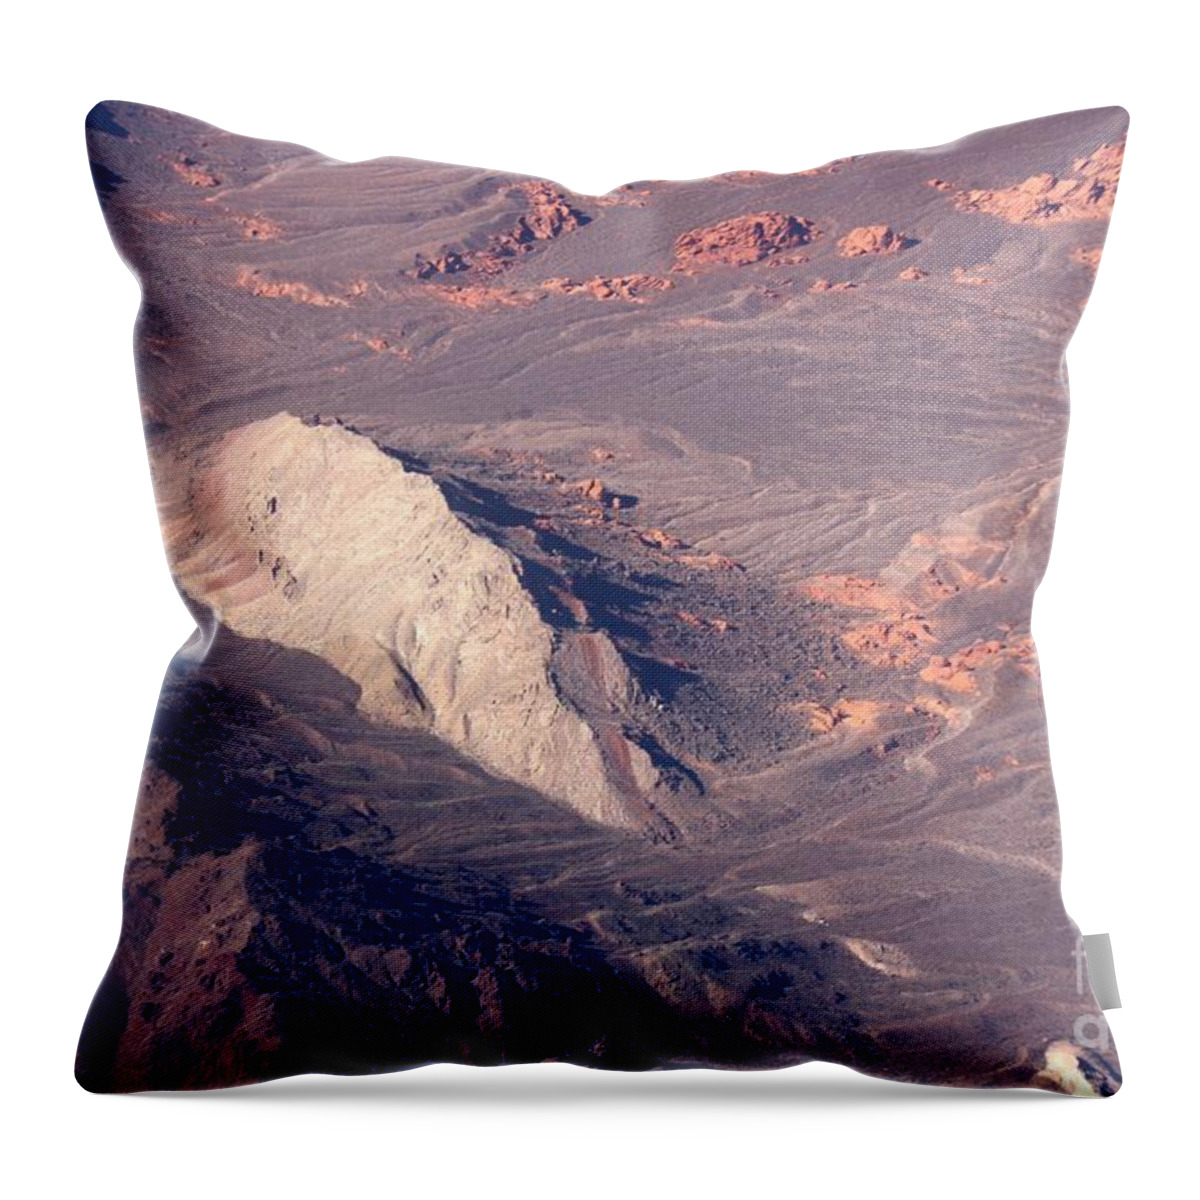 Mountains Throw Pillow featuring the photograph America's Beauty by Deena Withycombe